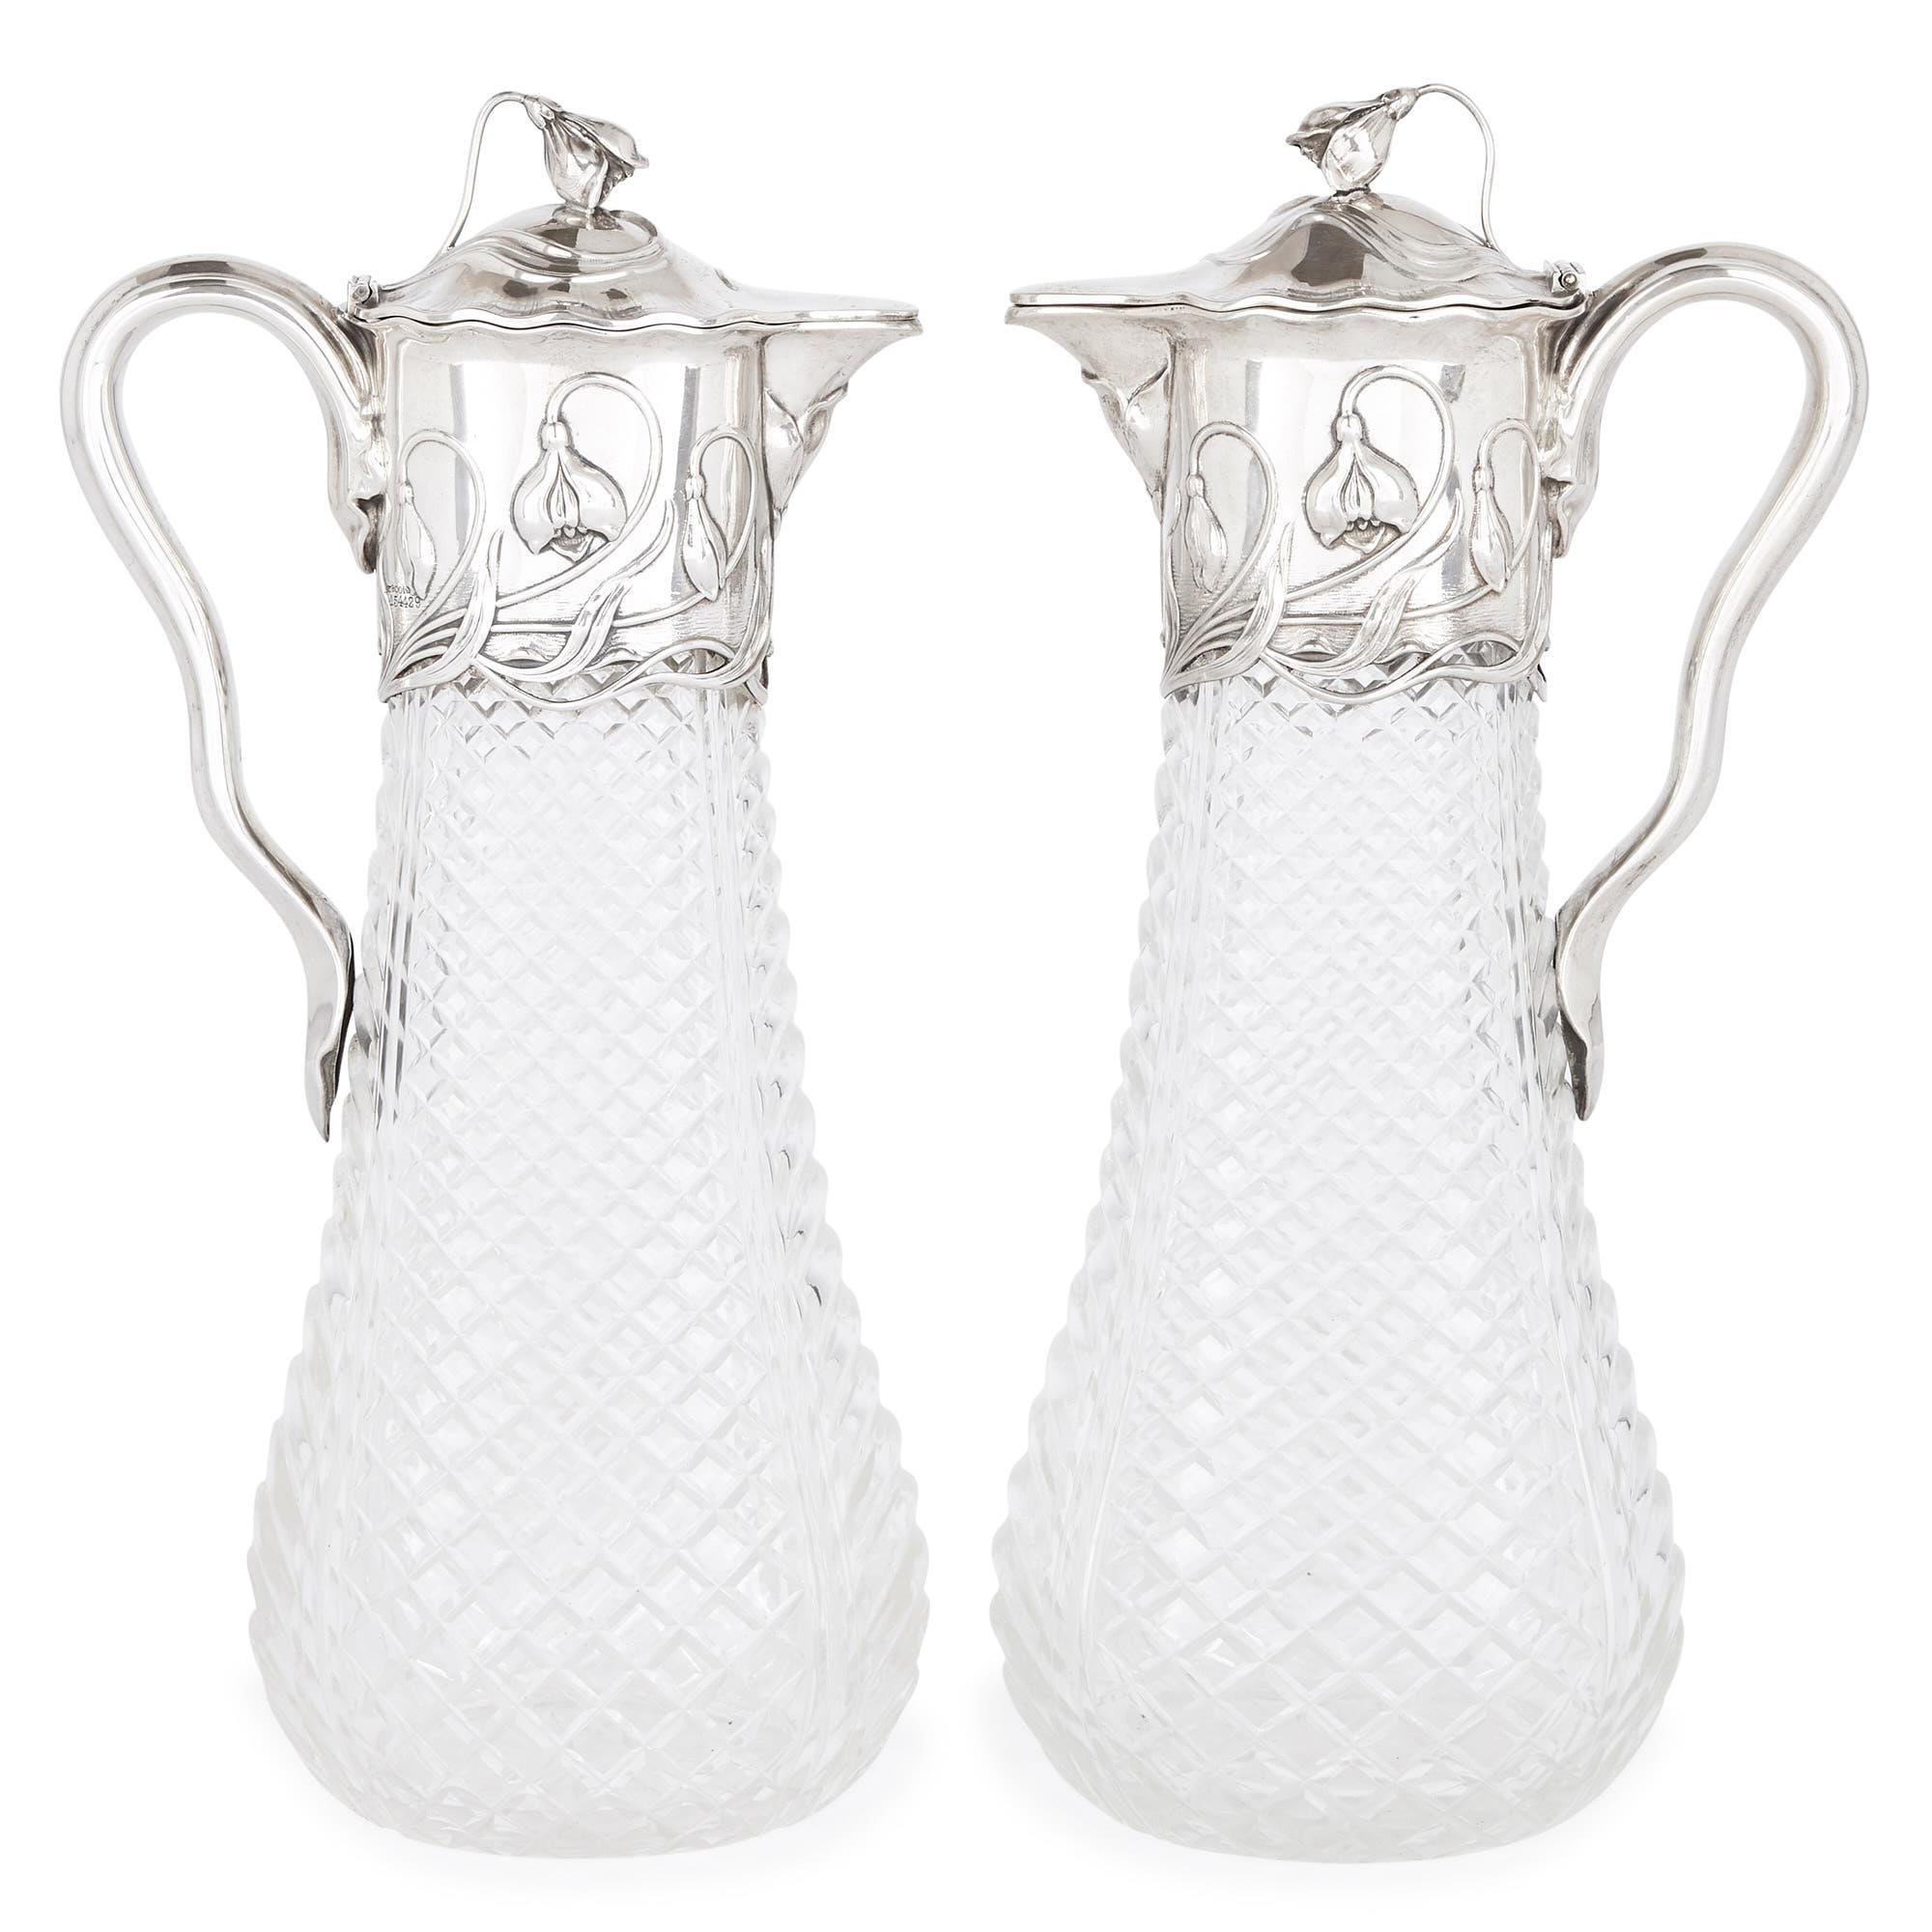 These graceful cut glass and silver claret jugs are designed in the Art Nouveau style. This style flourished in the arts in Europe in the late 19th-early 20th century. It was characterised by its use of continuous, serpentine lines and motifs, which